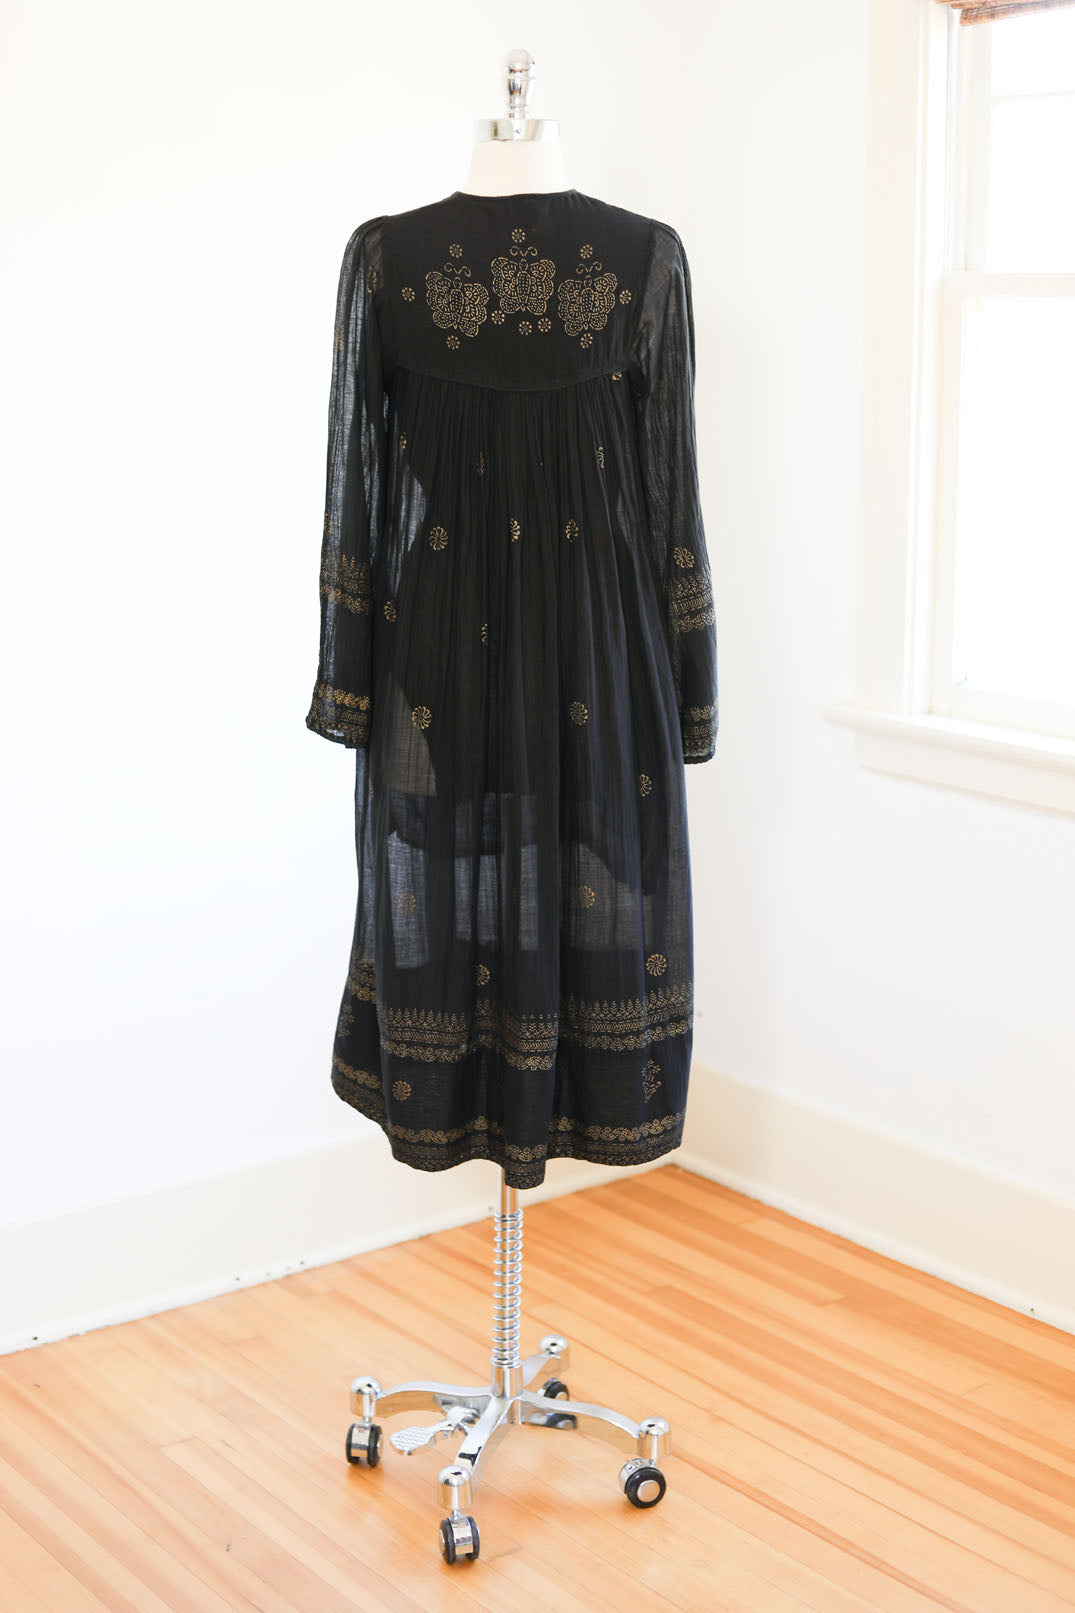 Vintage 1970s RARE Black Indian Dress - Gauzy Solid Black Tent Kaftan w Belt for Fitting + Gold Metallic Stamped BUTTERFLY Print Size XS - M